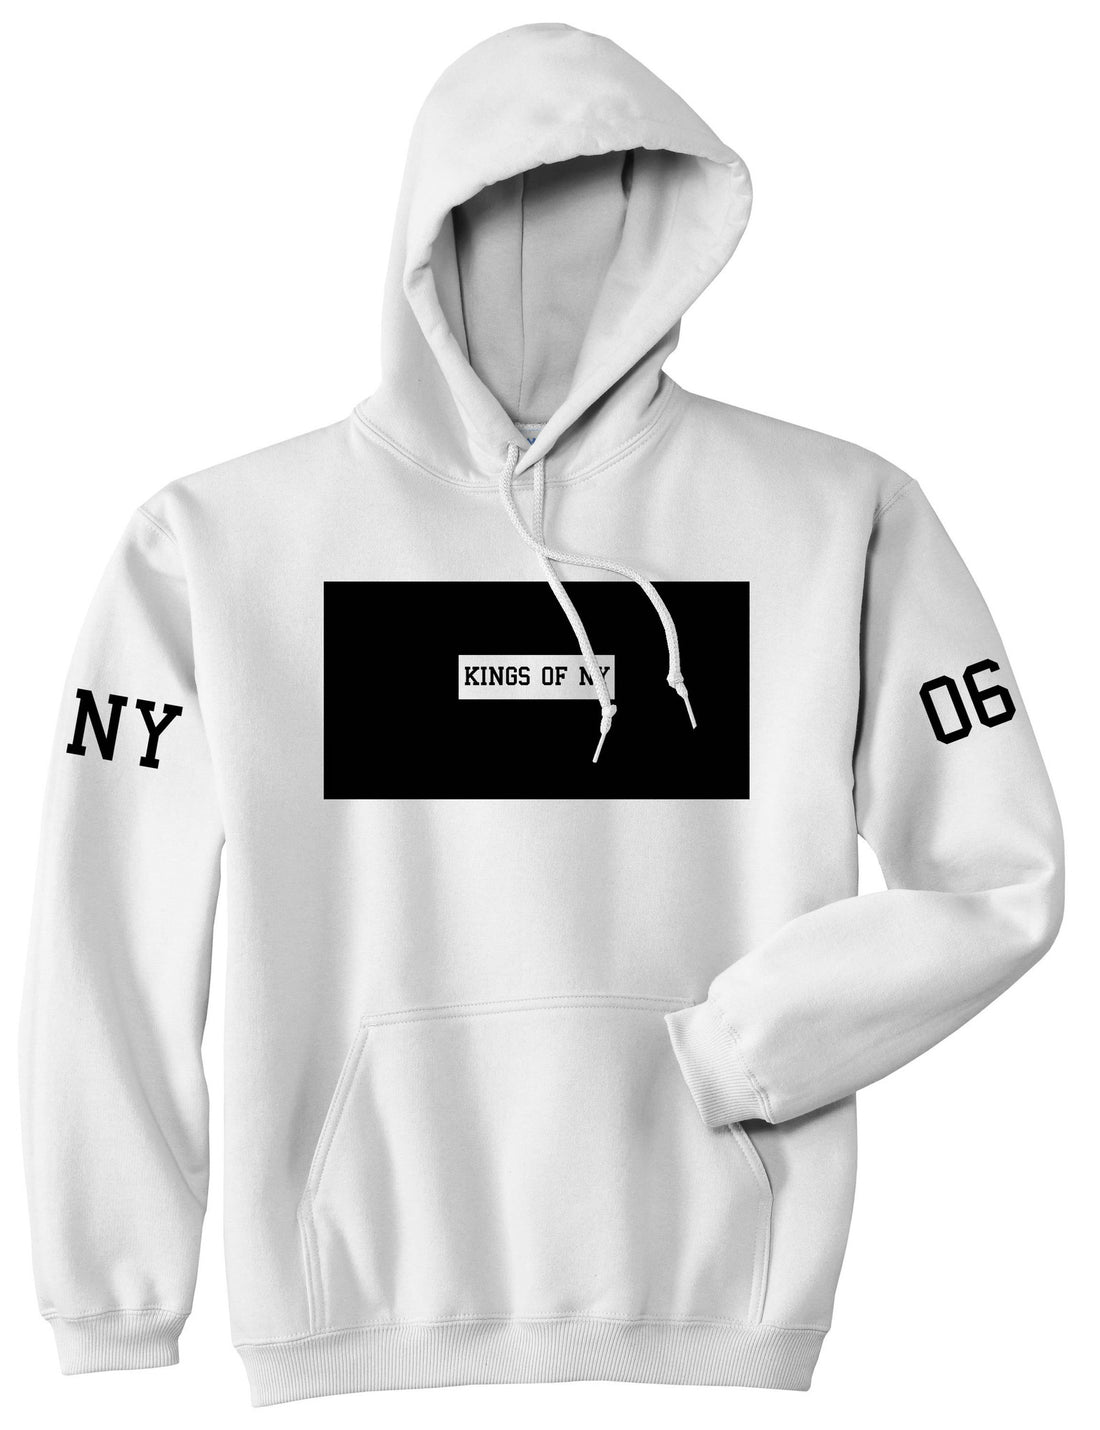 New York Logo 2006 Style Trill Pullover Hoodie Hoody in White by Kings Of NY